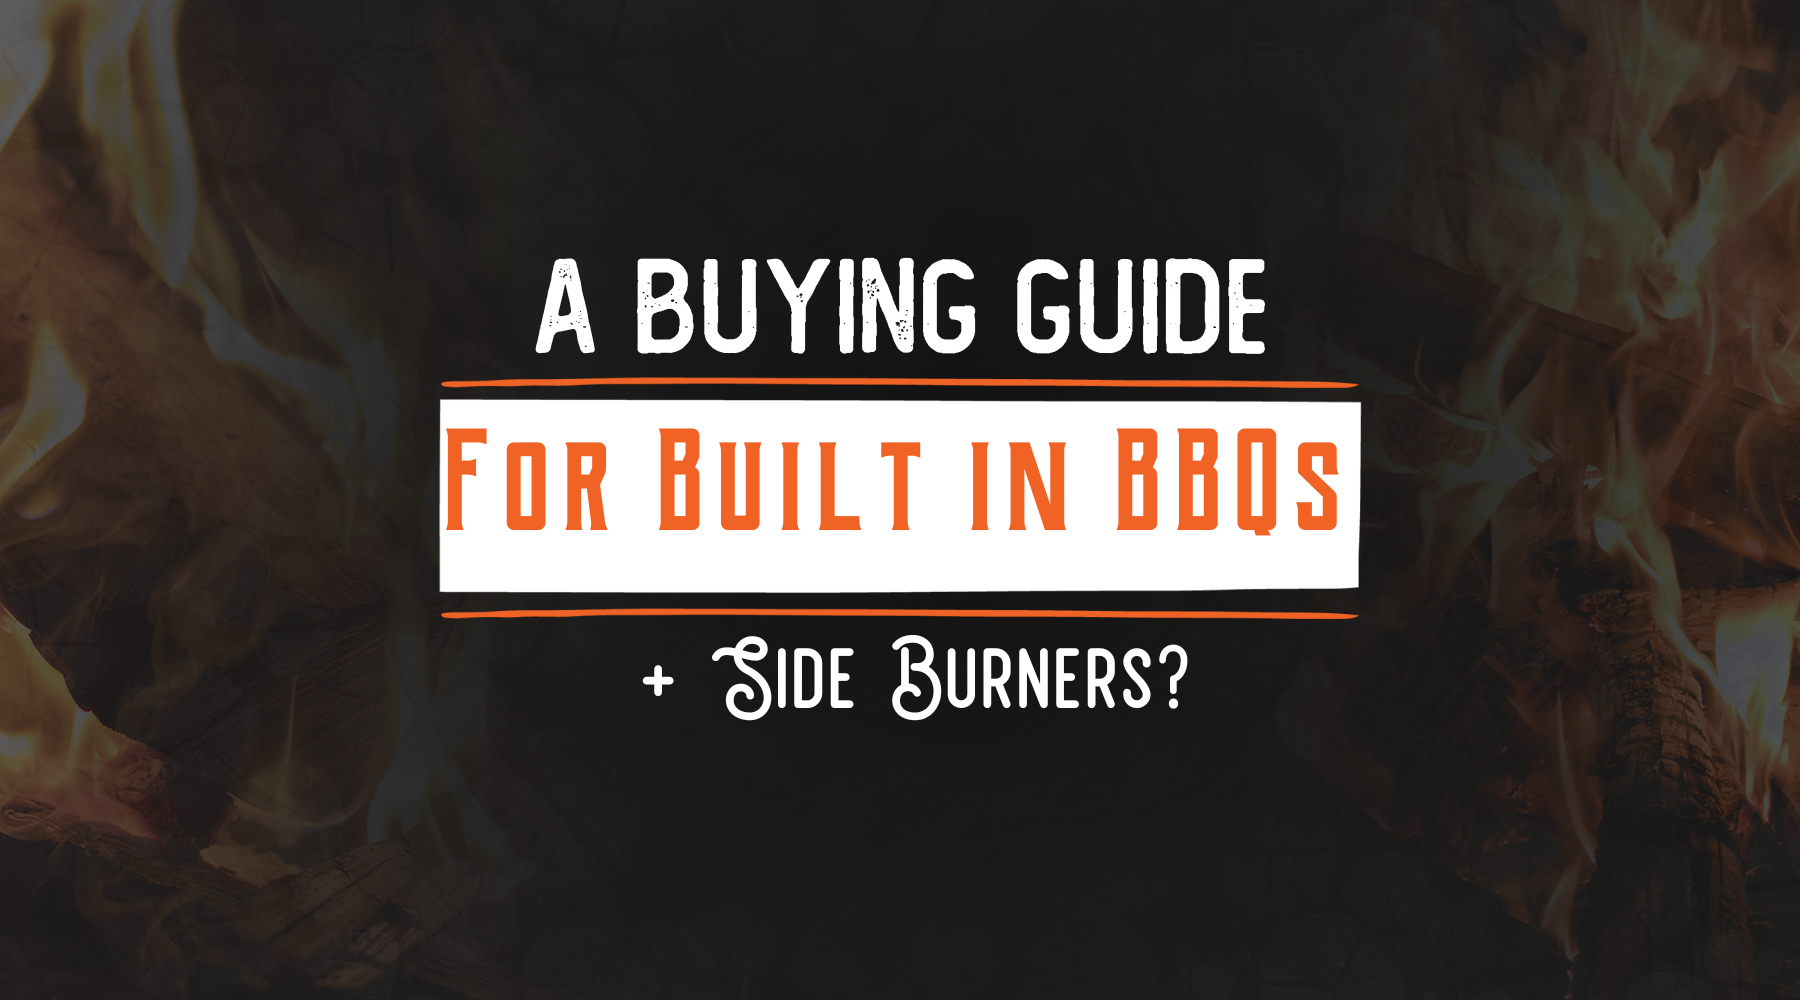 The Buying Guide for Built in BBQs & Side Burners